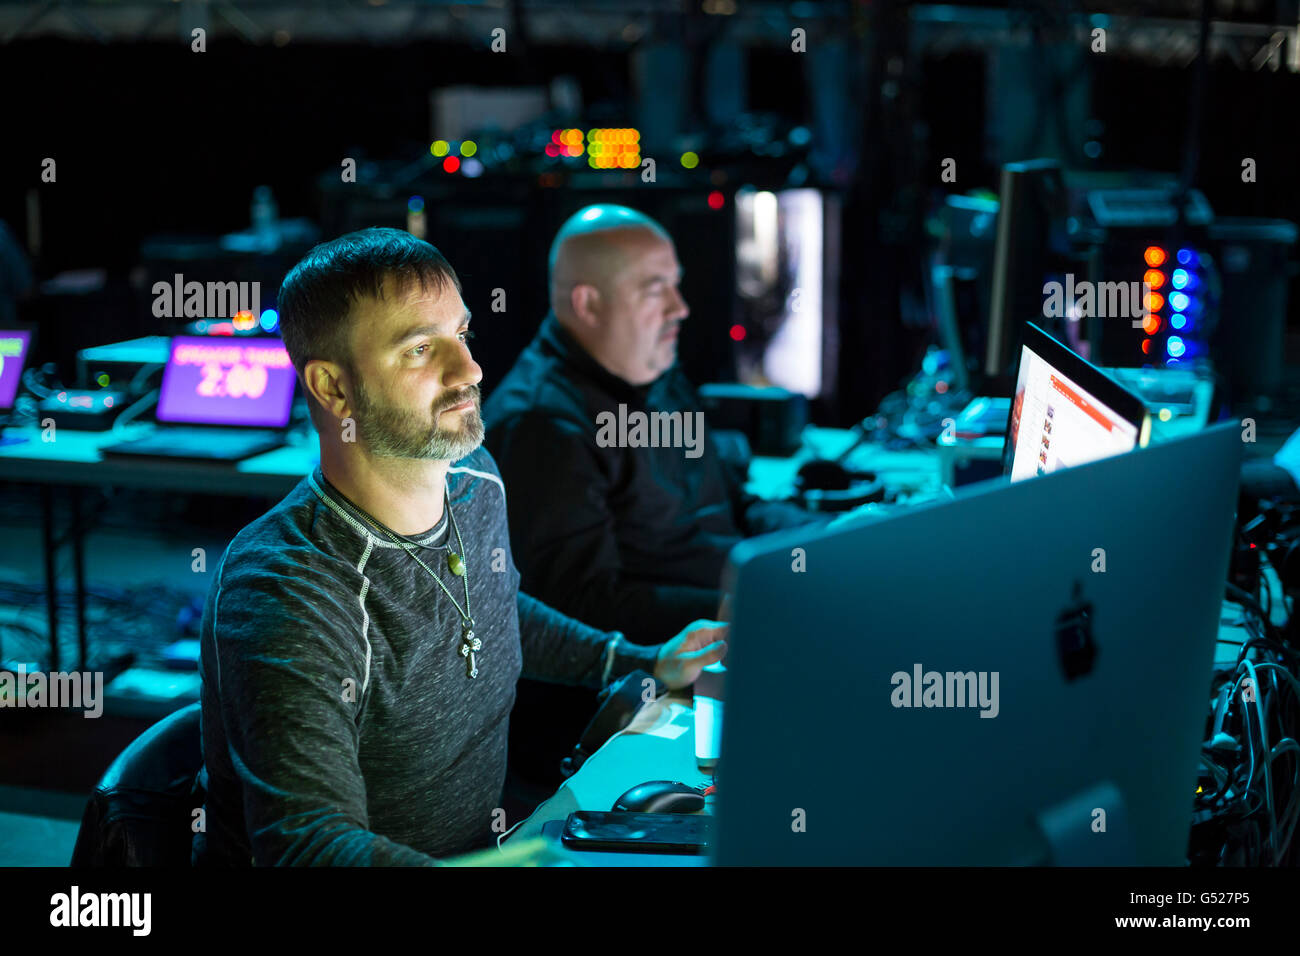 Detroit, Michigan - Workers operate audio and visual equipment backstage at the convention of the Service Employees union. Stock Photo